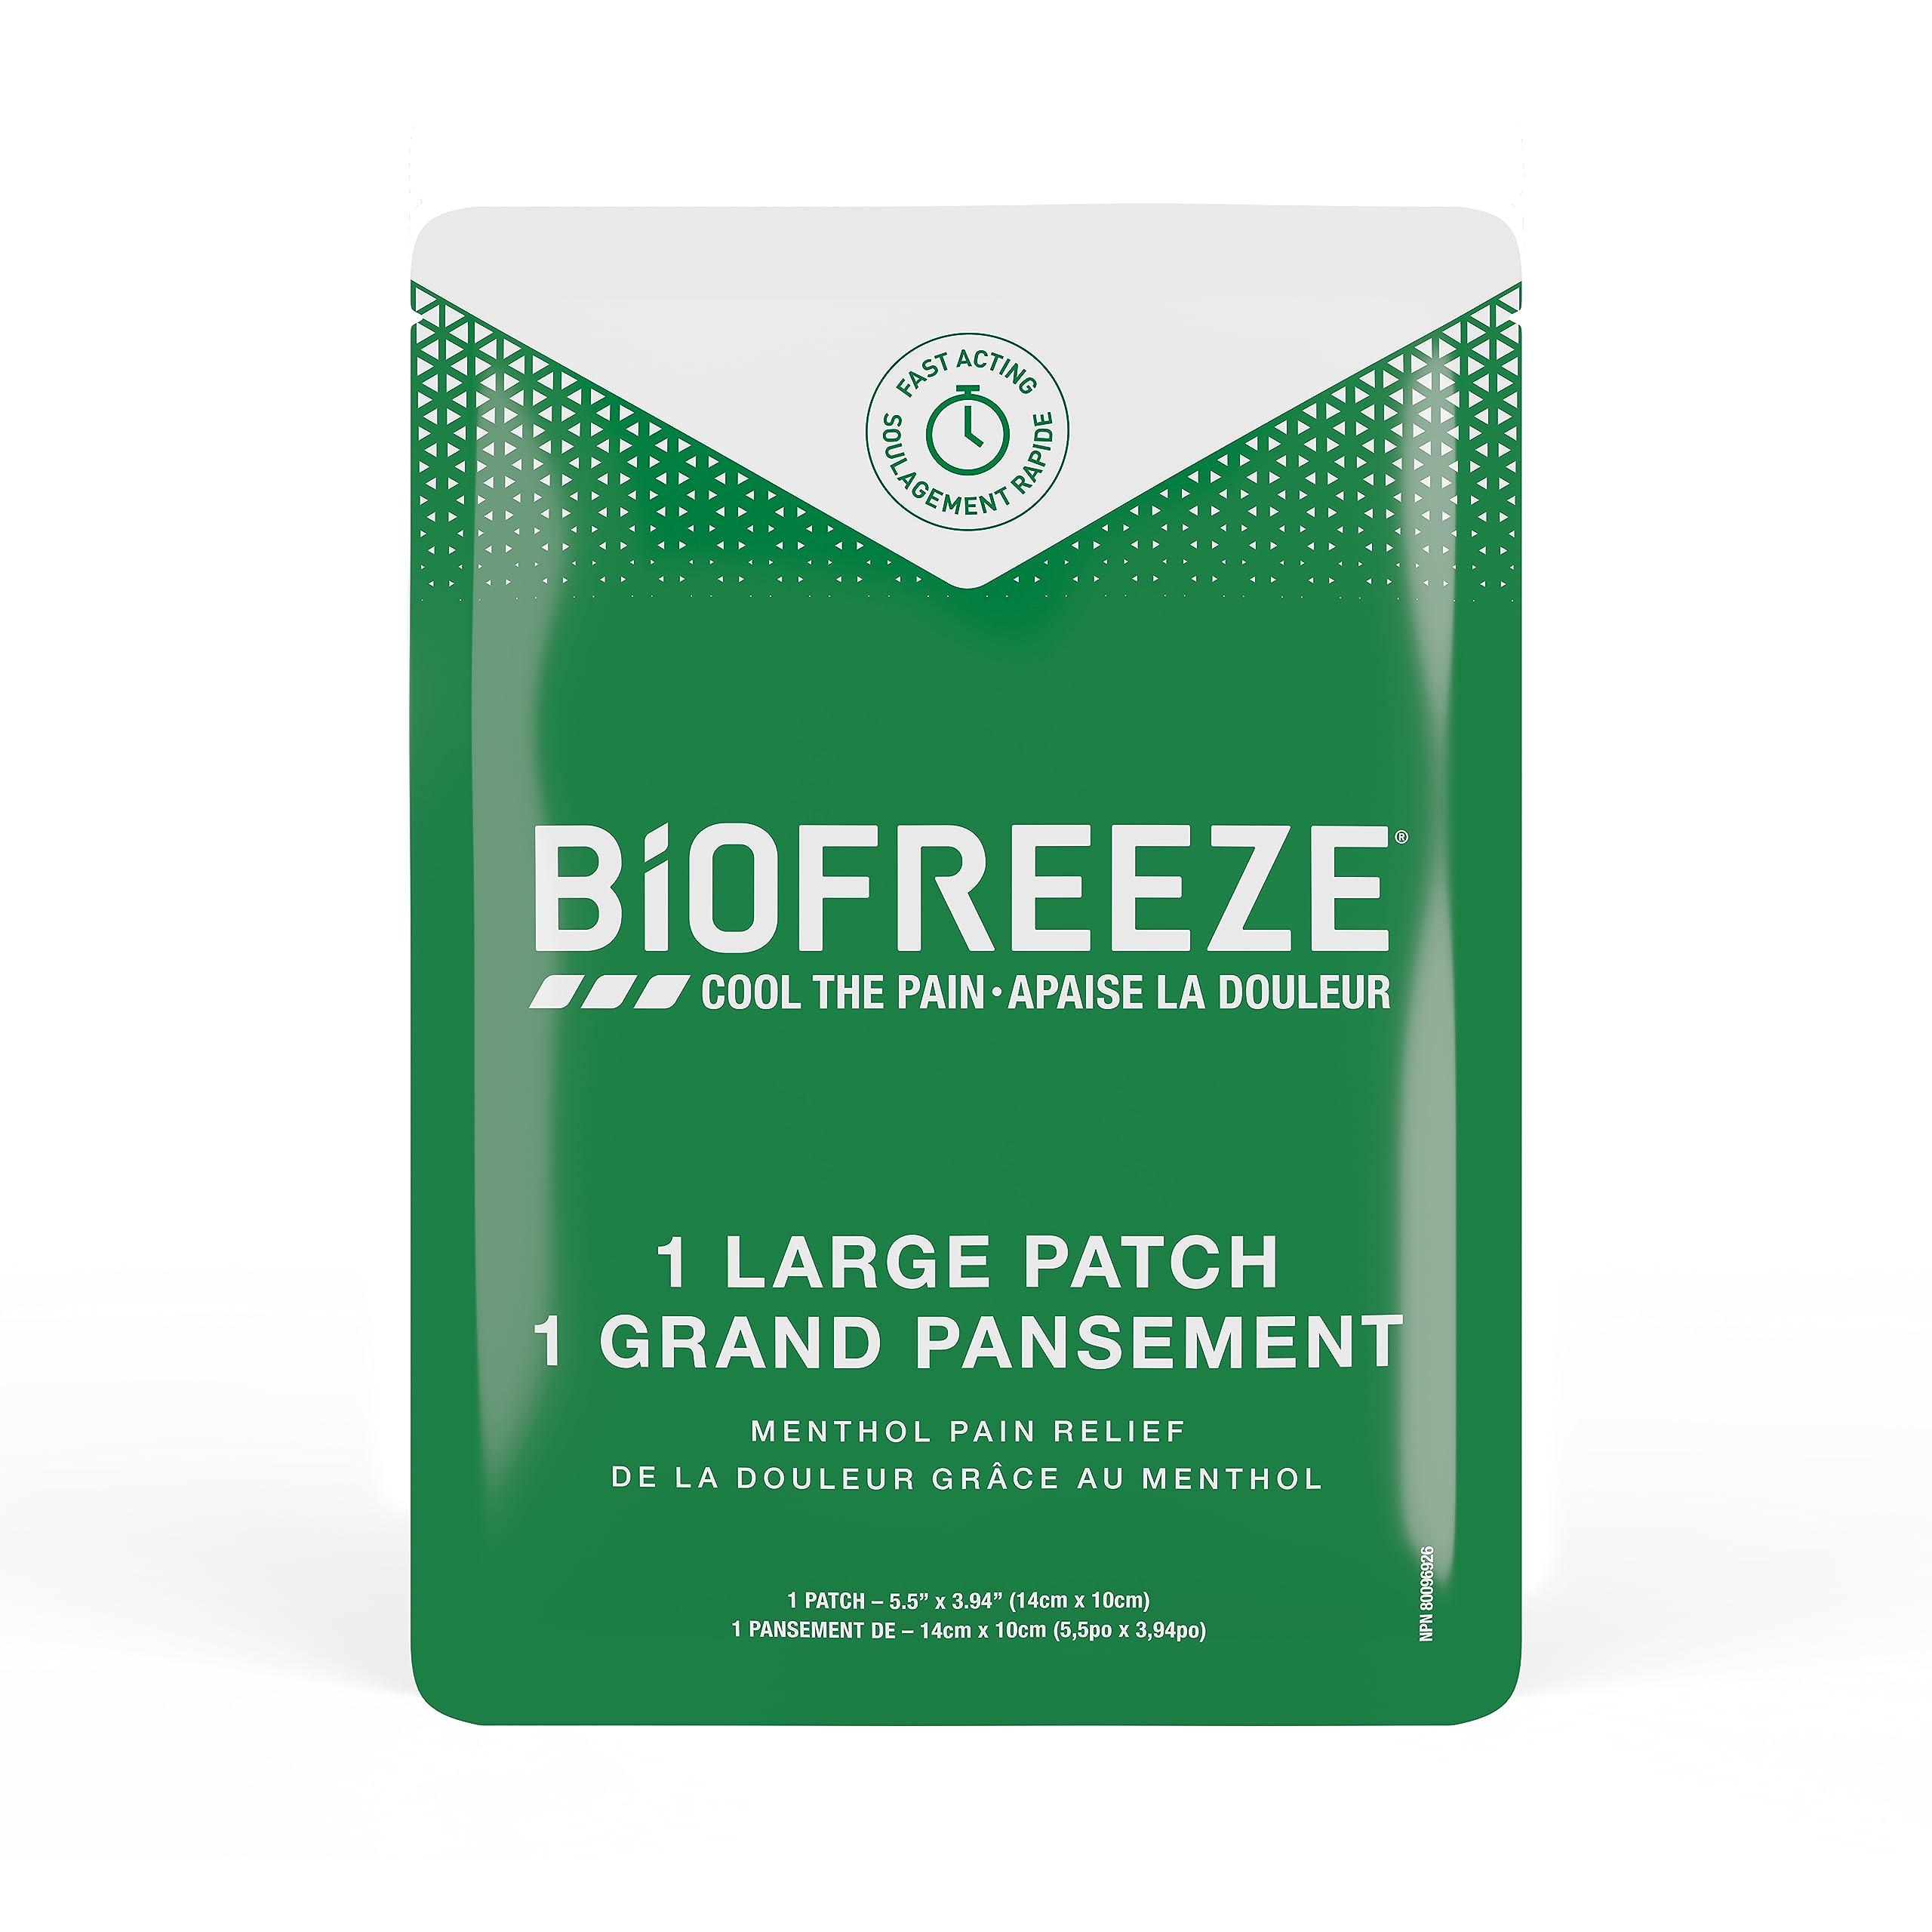 BioFreeze Large Patch, for Sore Muscles, Backaches and Joint Pain, 5 large patches